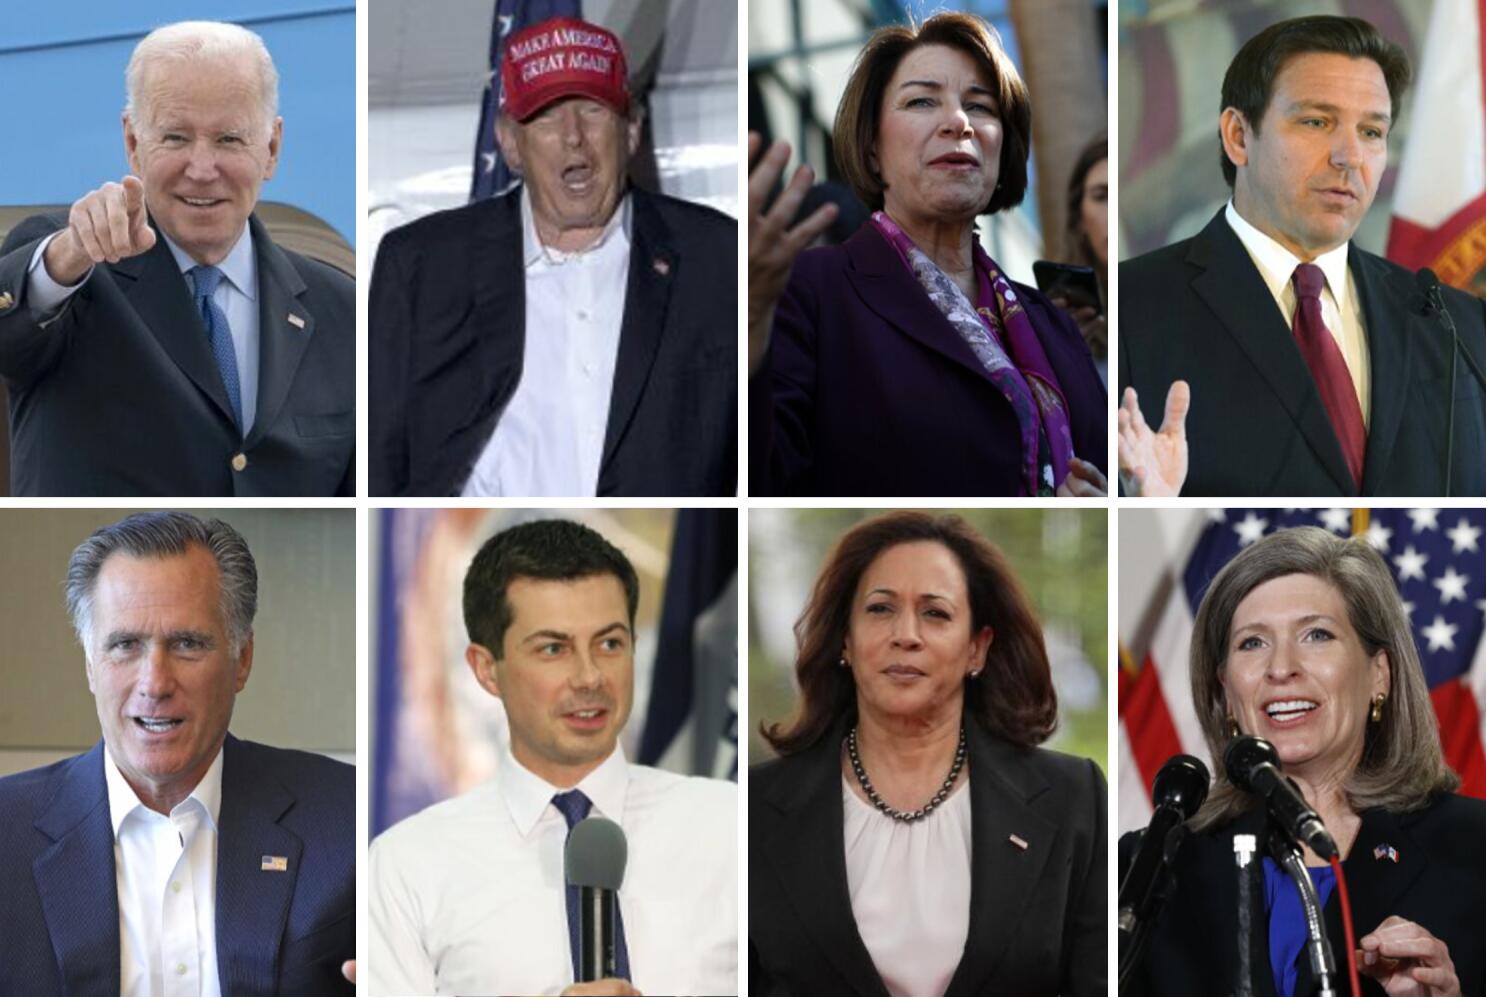 A break down of the candidates running for president in 2024